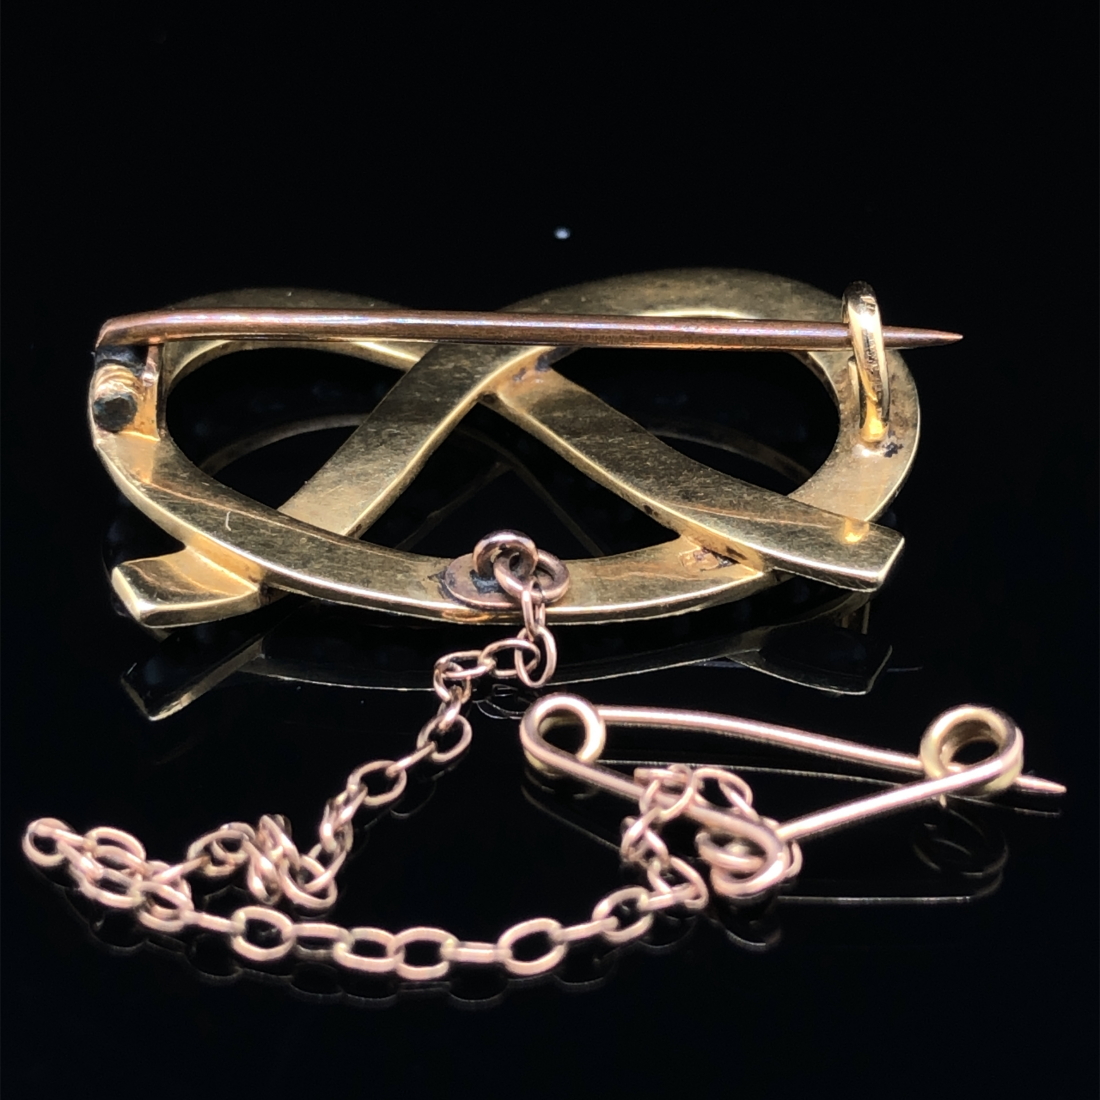 AN ANTIQUE GOLD AND SEED PEARL SWEETHEART LOVERS KNOT, ALSO KNOWN AS A STAFFORD KNOT BROOCH. THE - Image 3 of 3